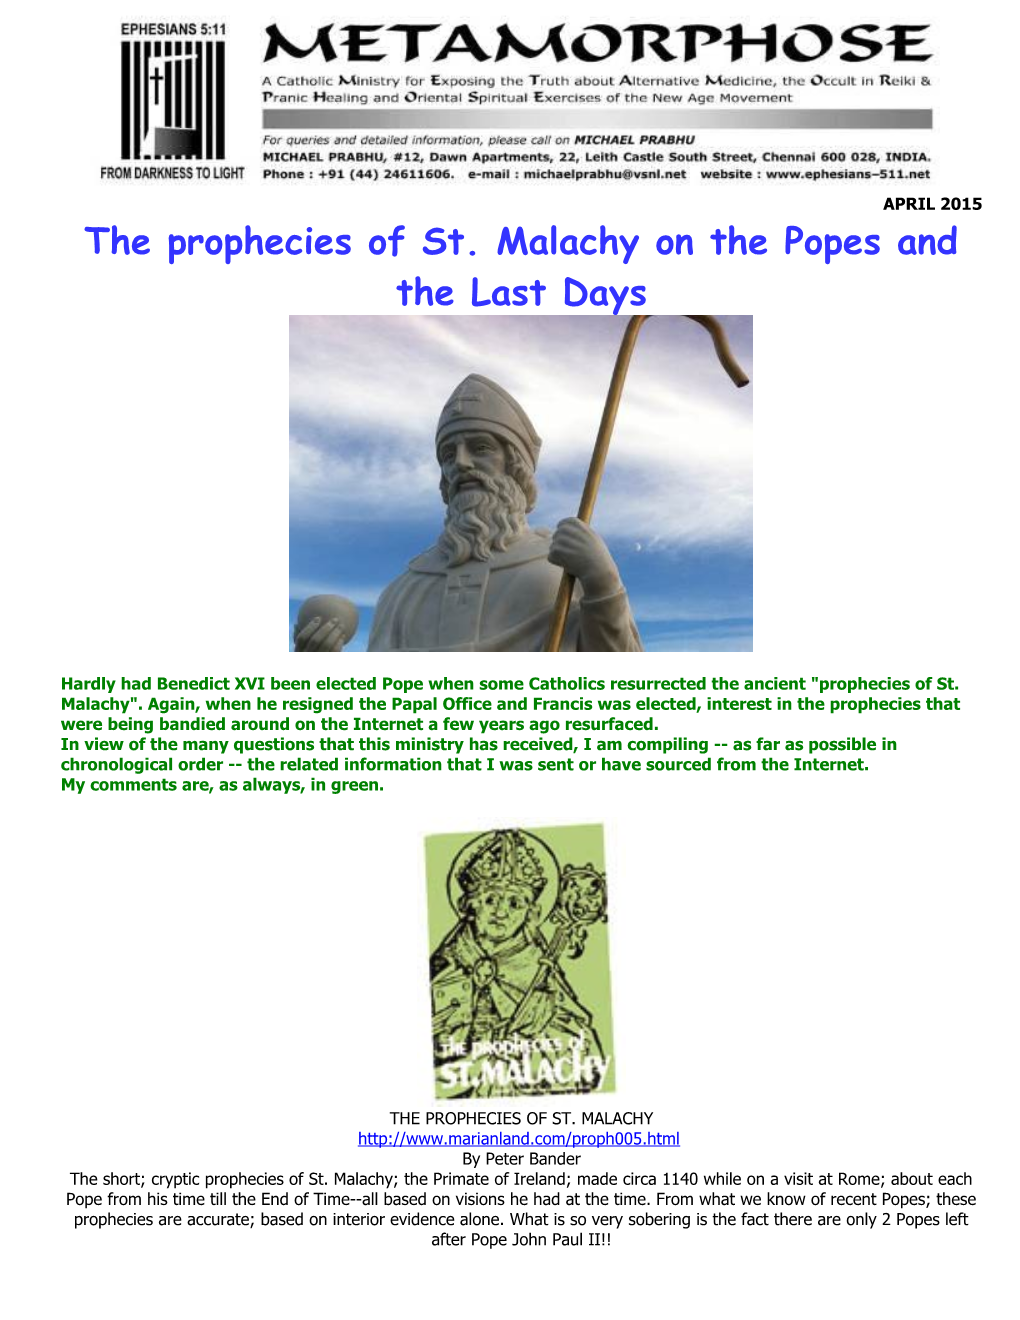 The Prophecies of St. Malachy on the Popes and the Last Days